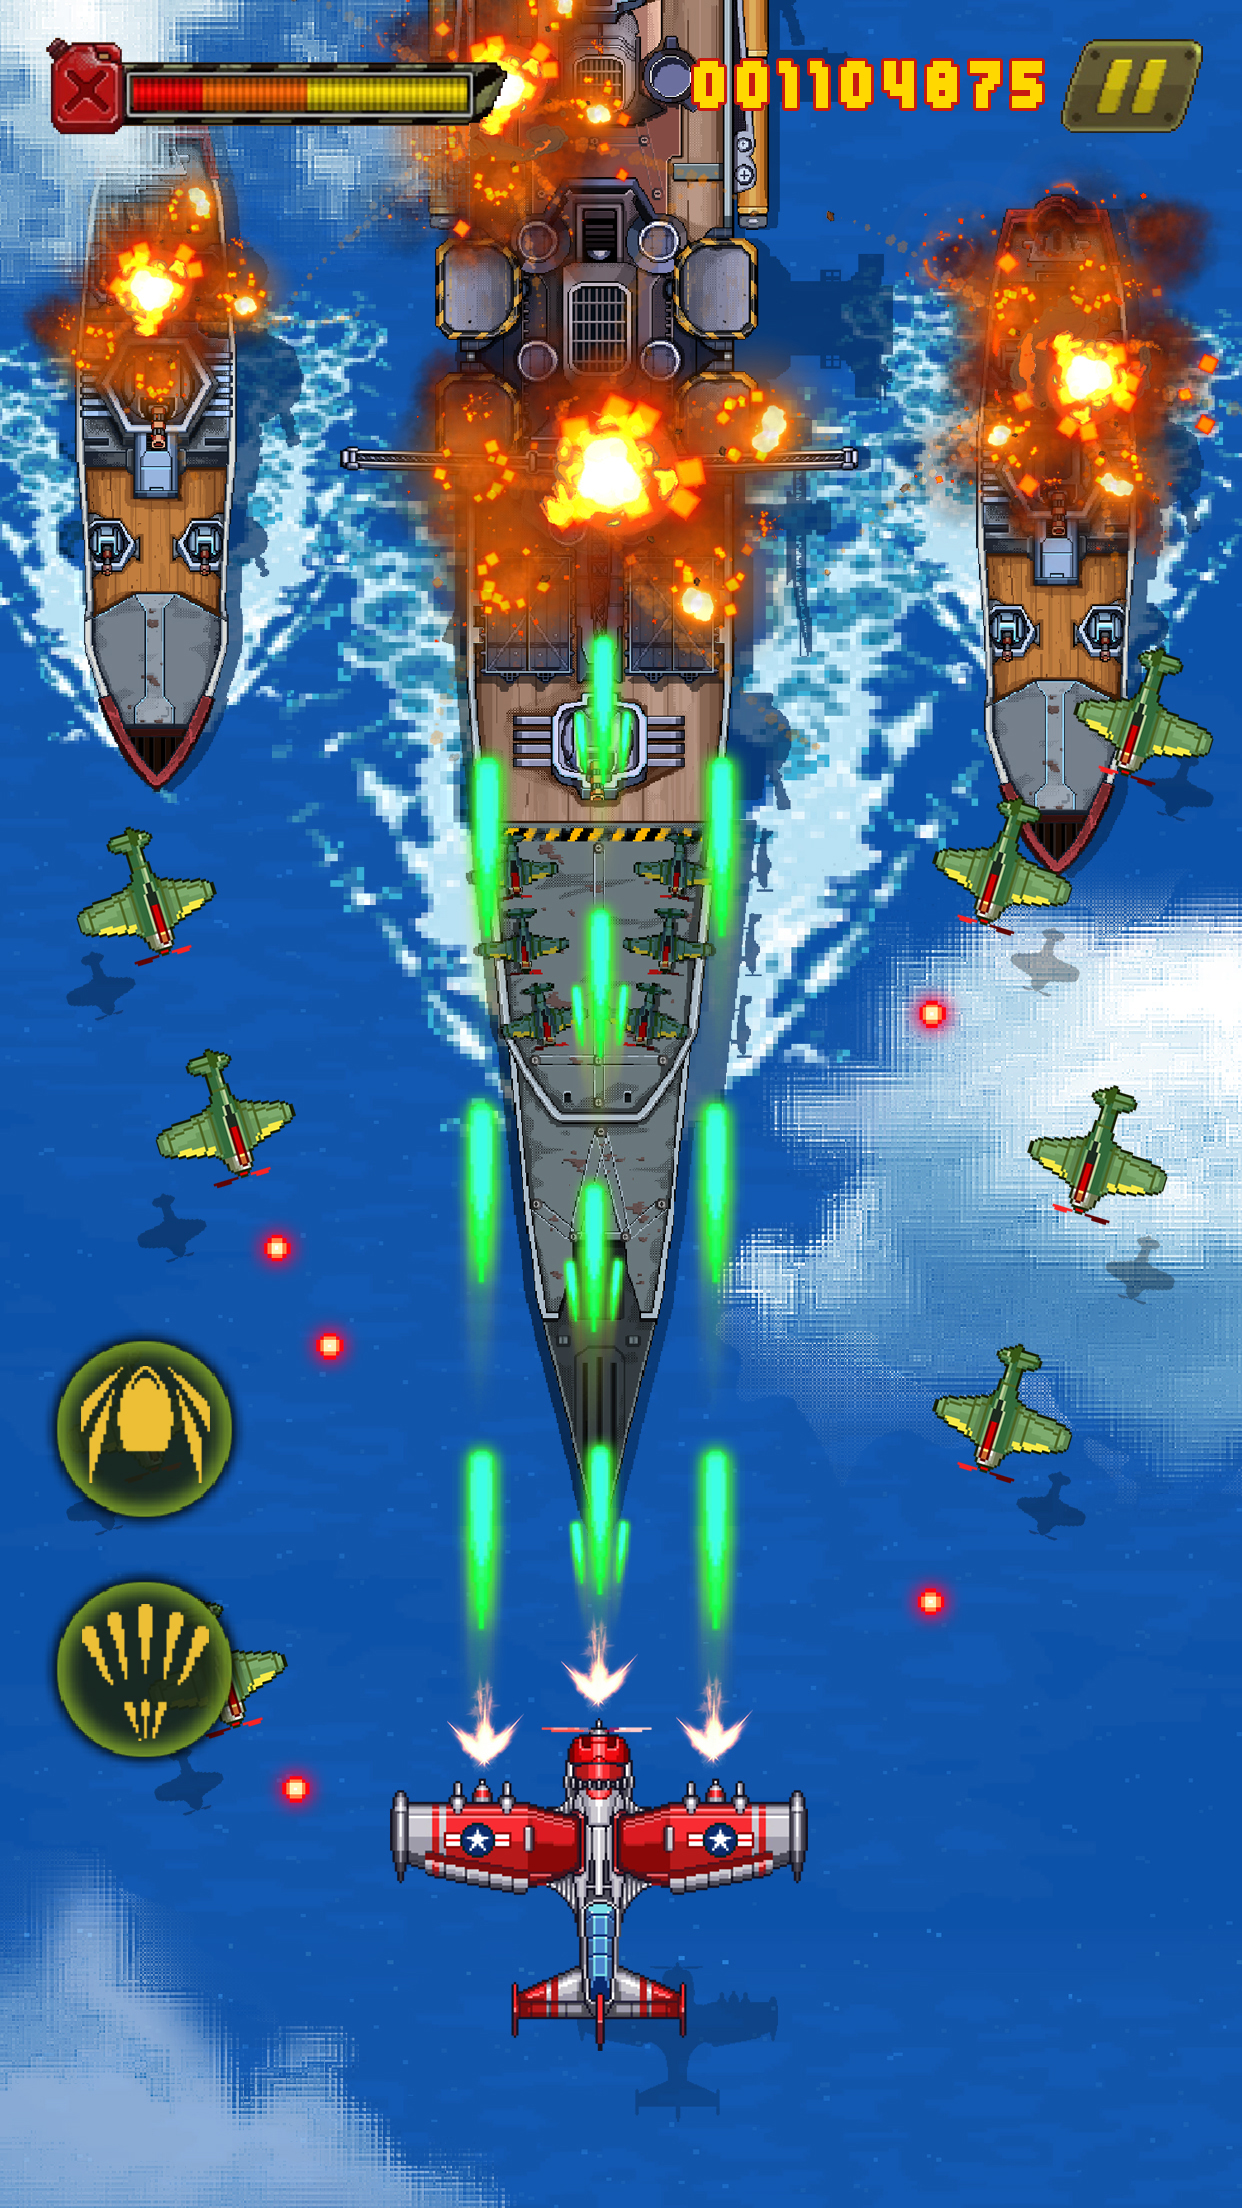 1945 Airplane Shooting Games App Store Review Aso Revenue Downloads Appfollow